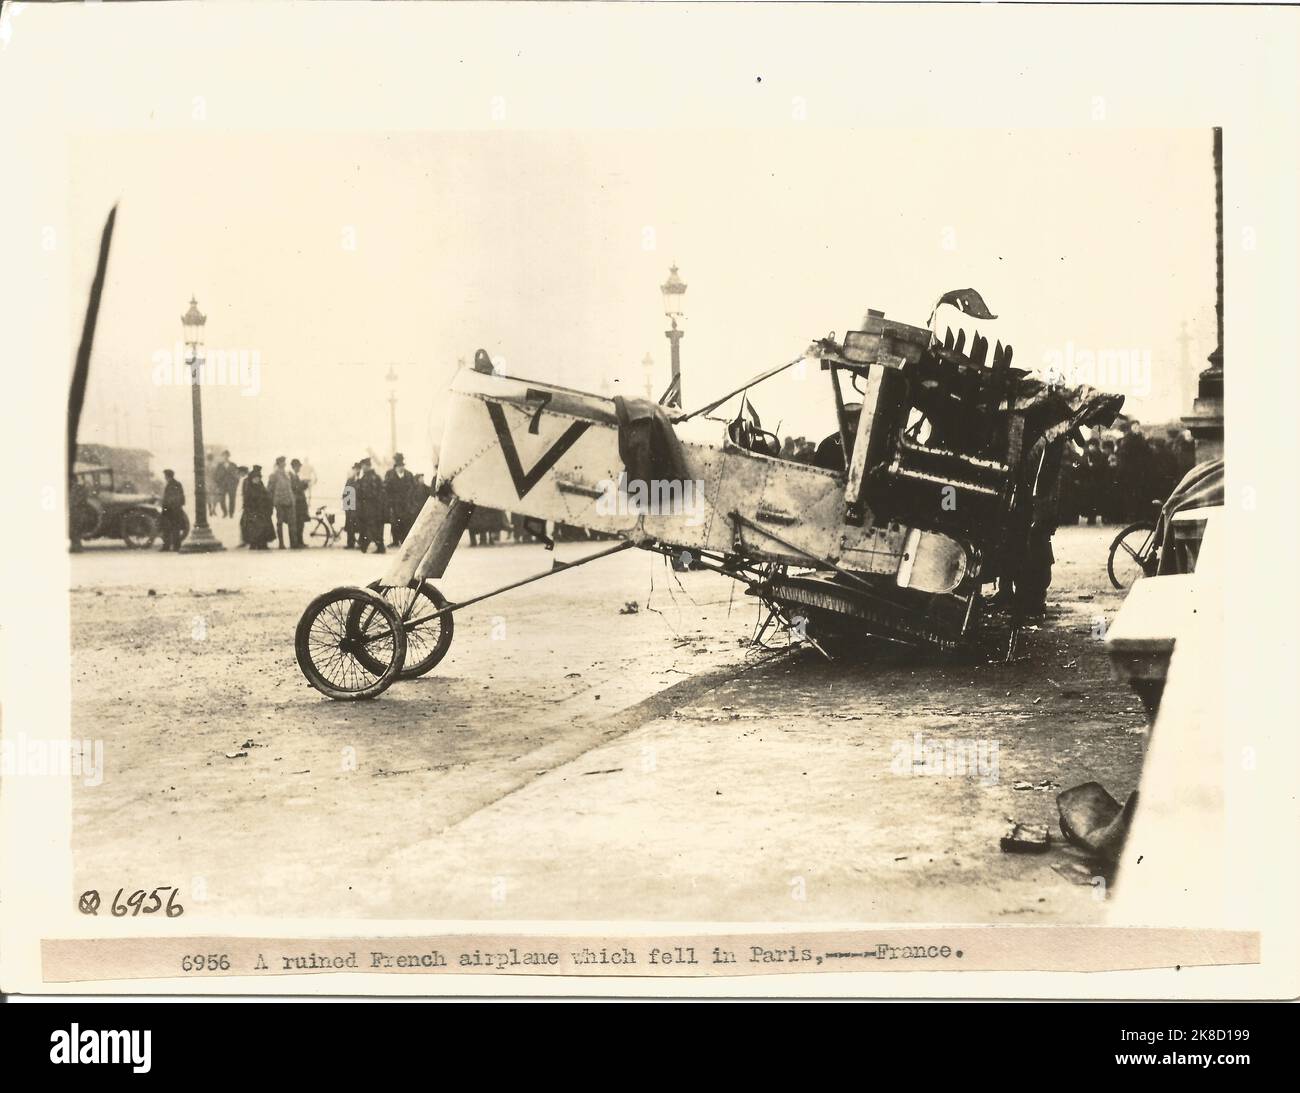 WWI Ruined French airplane in Paris France Stock Photo